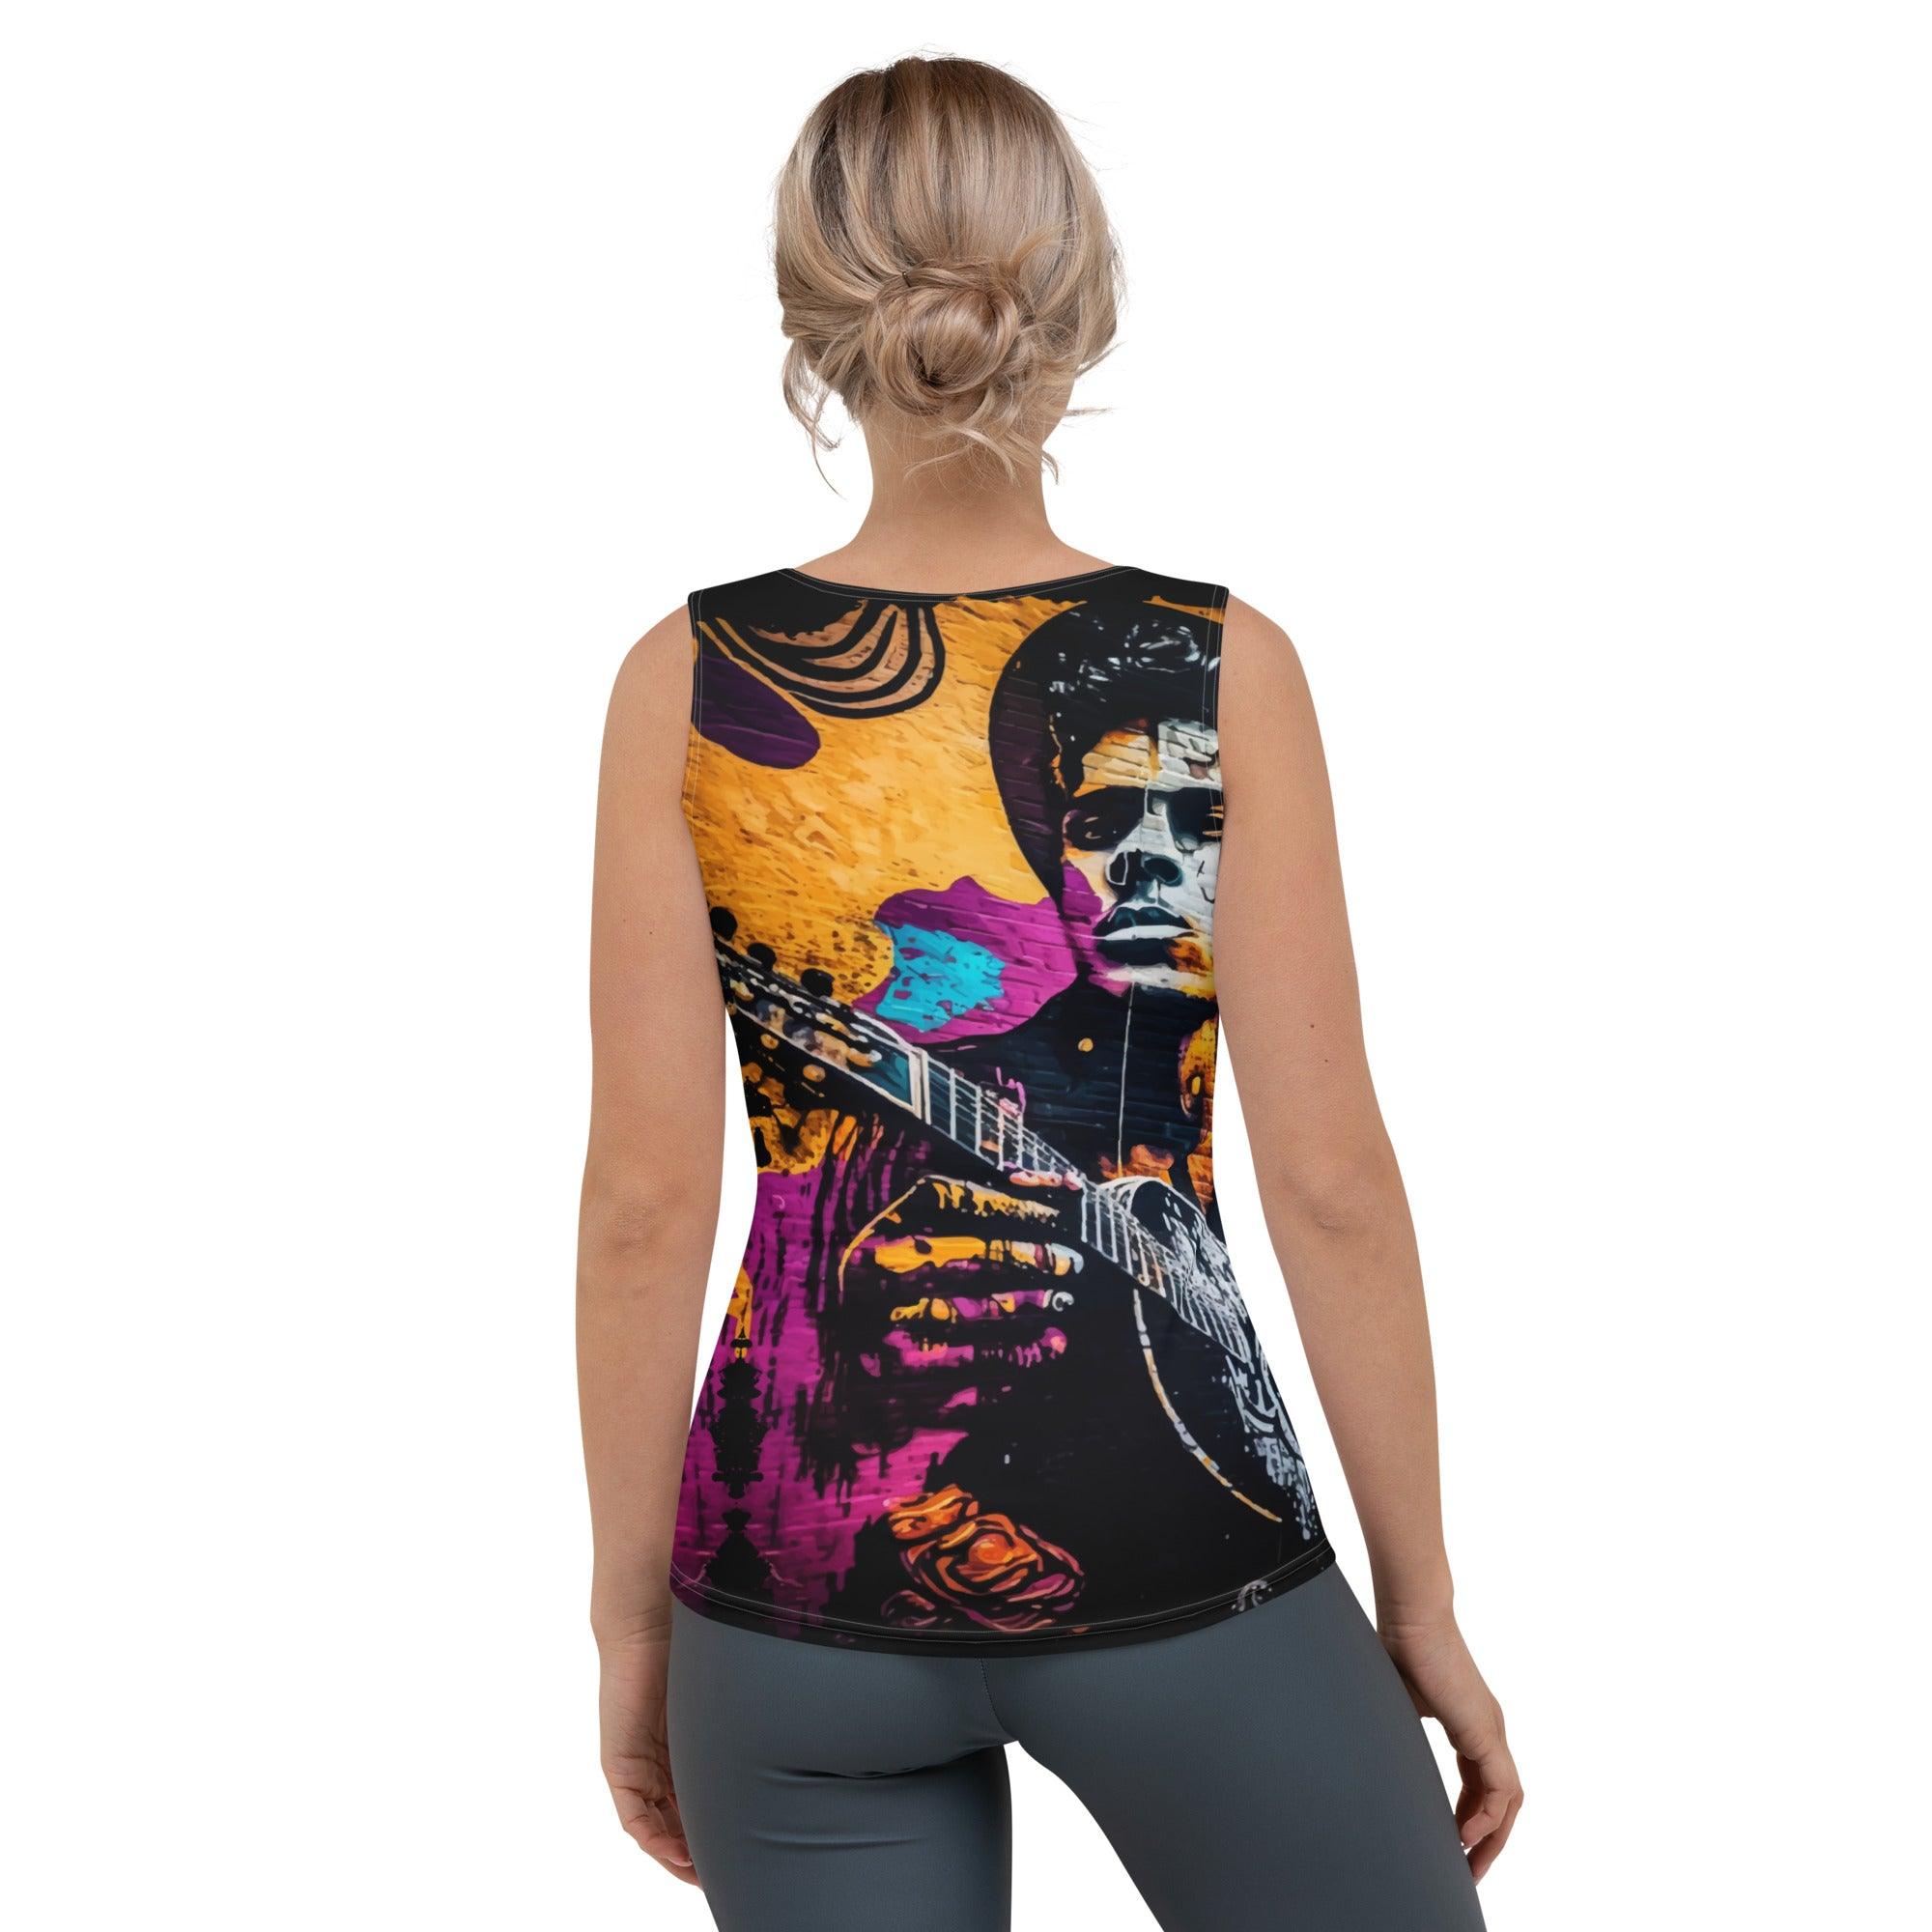 Melodies At His Fingertips Sublimation Cut & Sew Tank Top - Beyond T-shirts